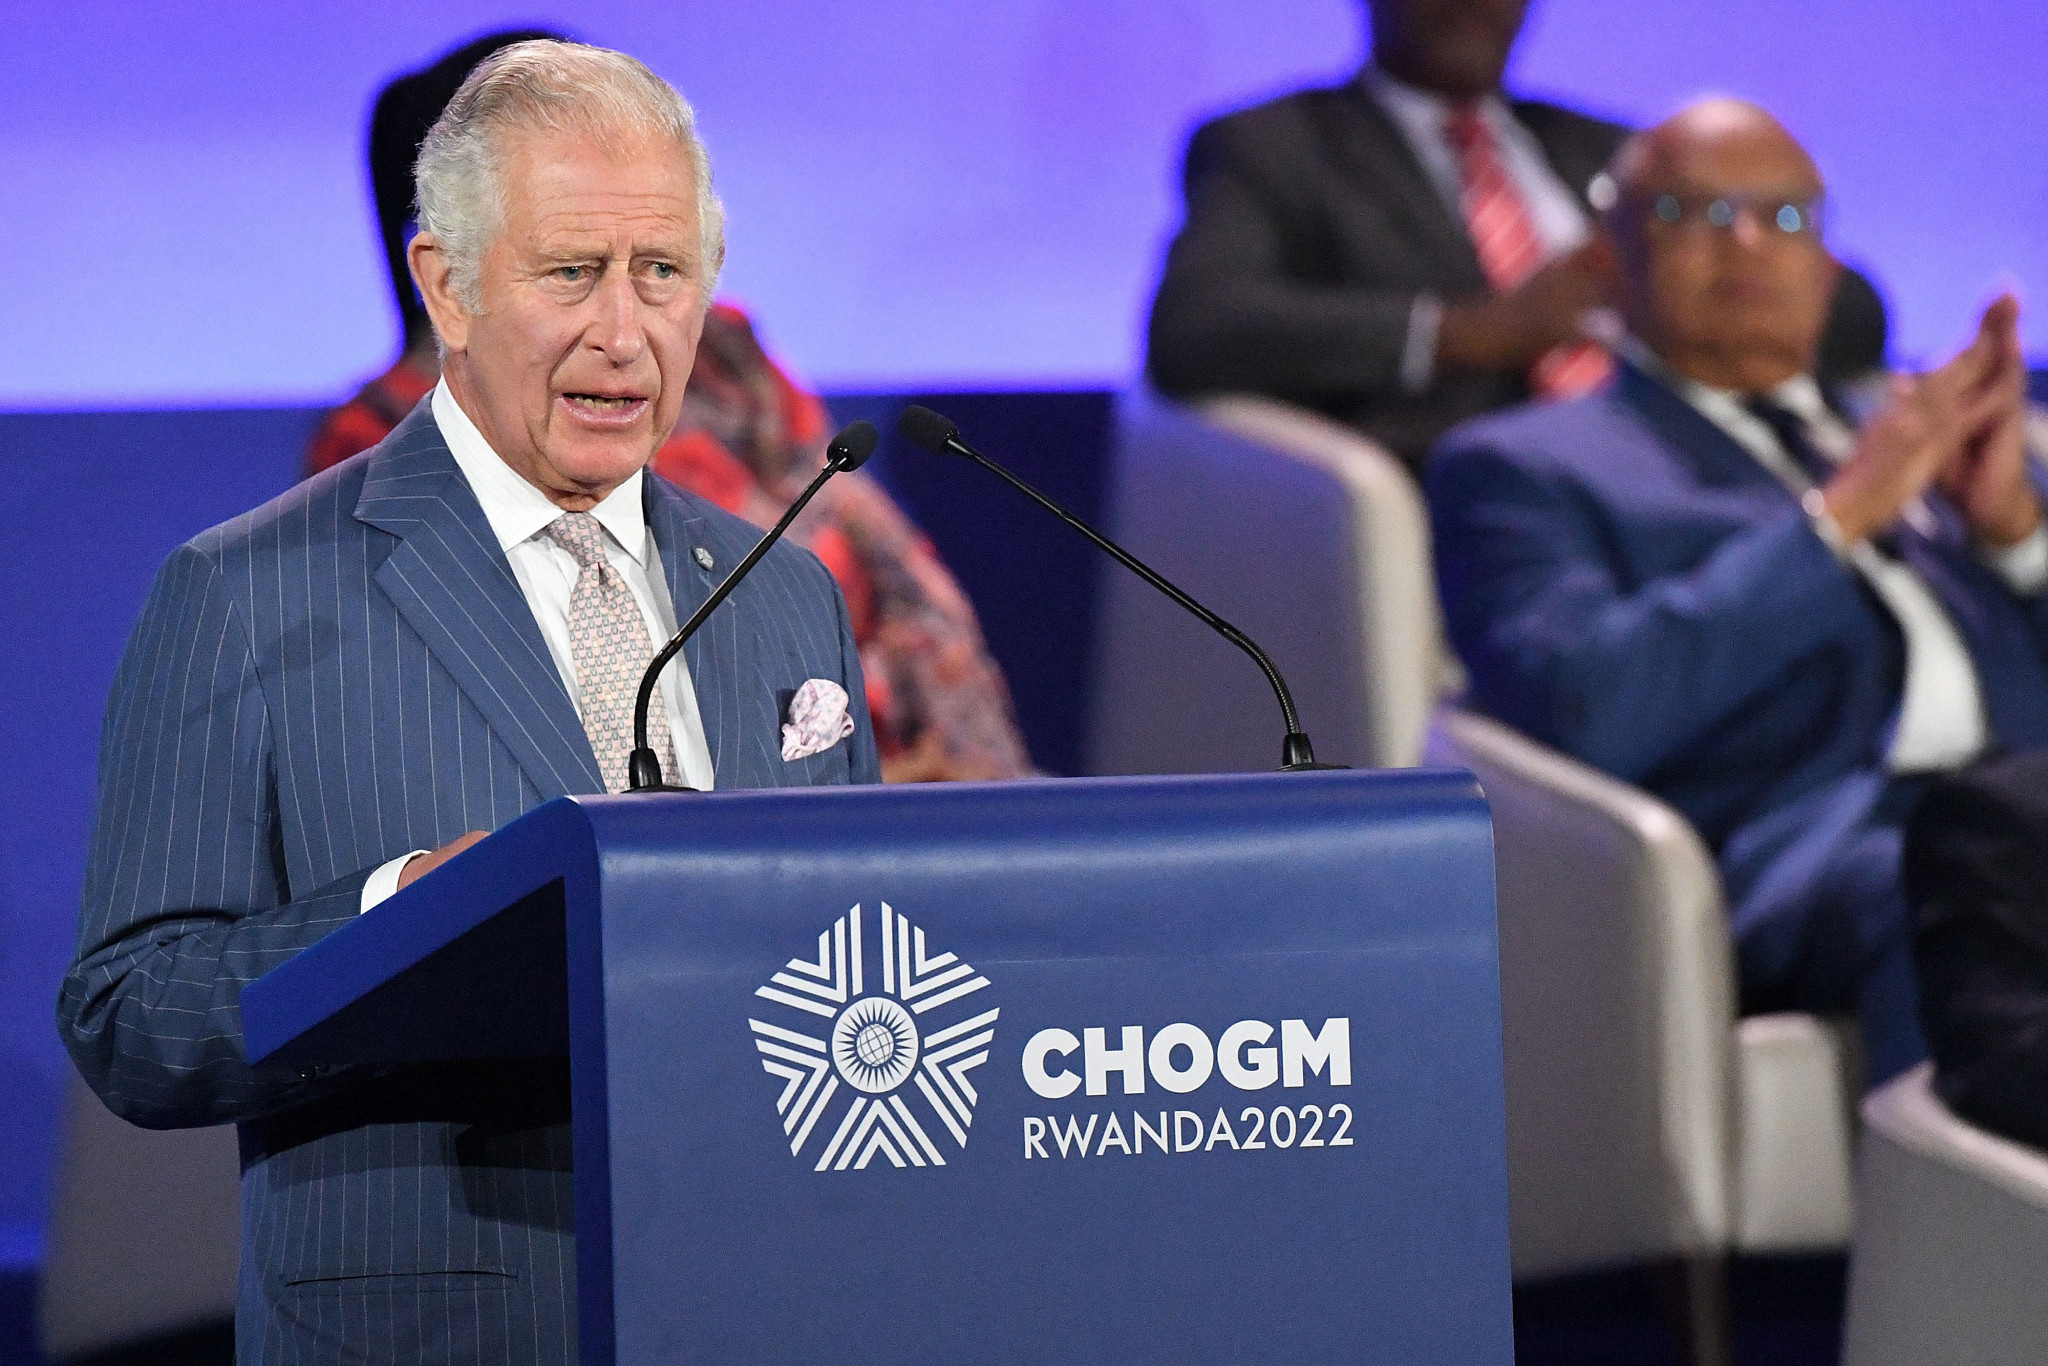 Prince Charles is set to represent the Queen at the Opening Ceremony of the 2022 Commonwealth Games in Birmingham ©Getty Images